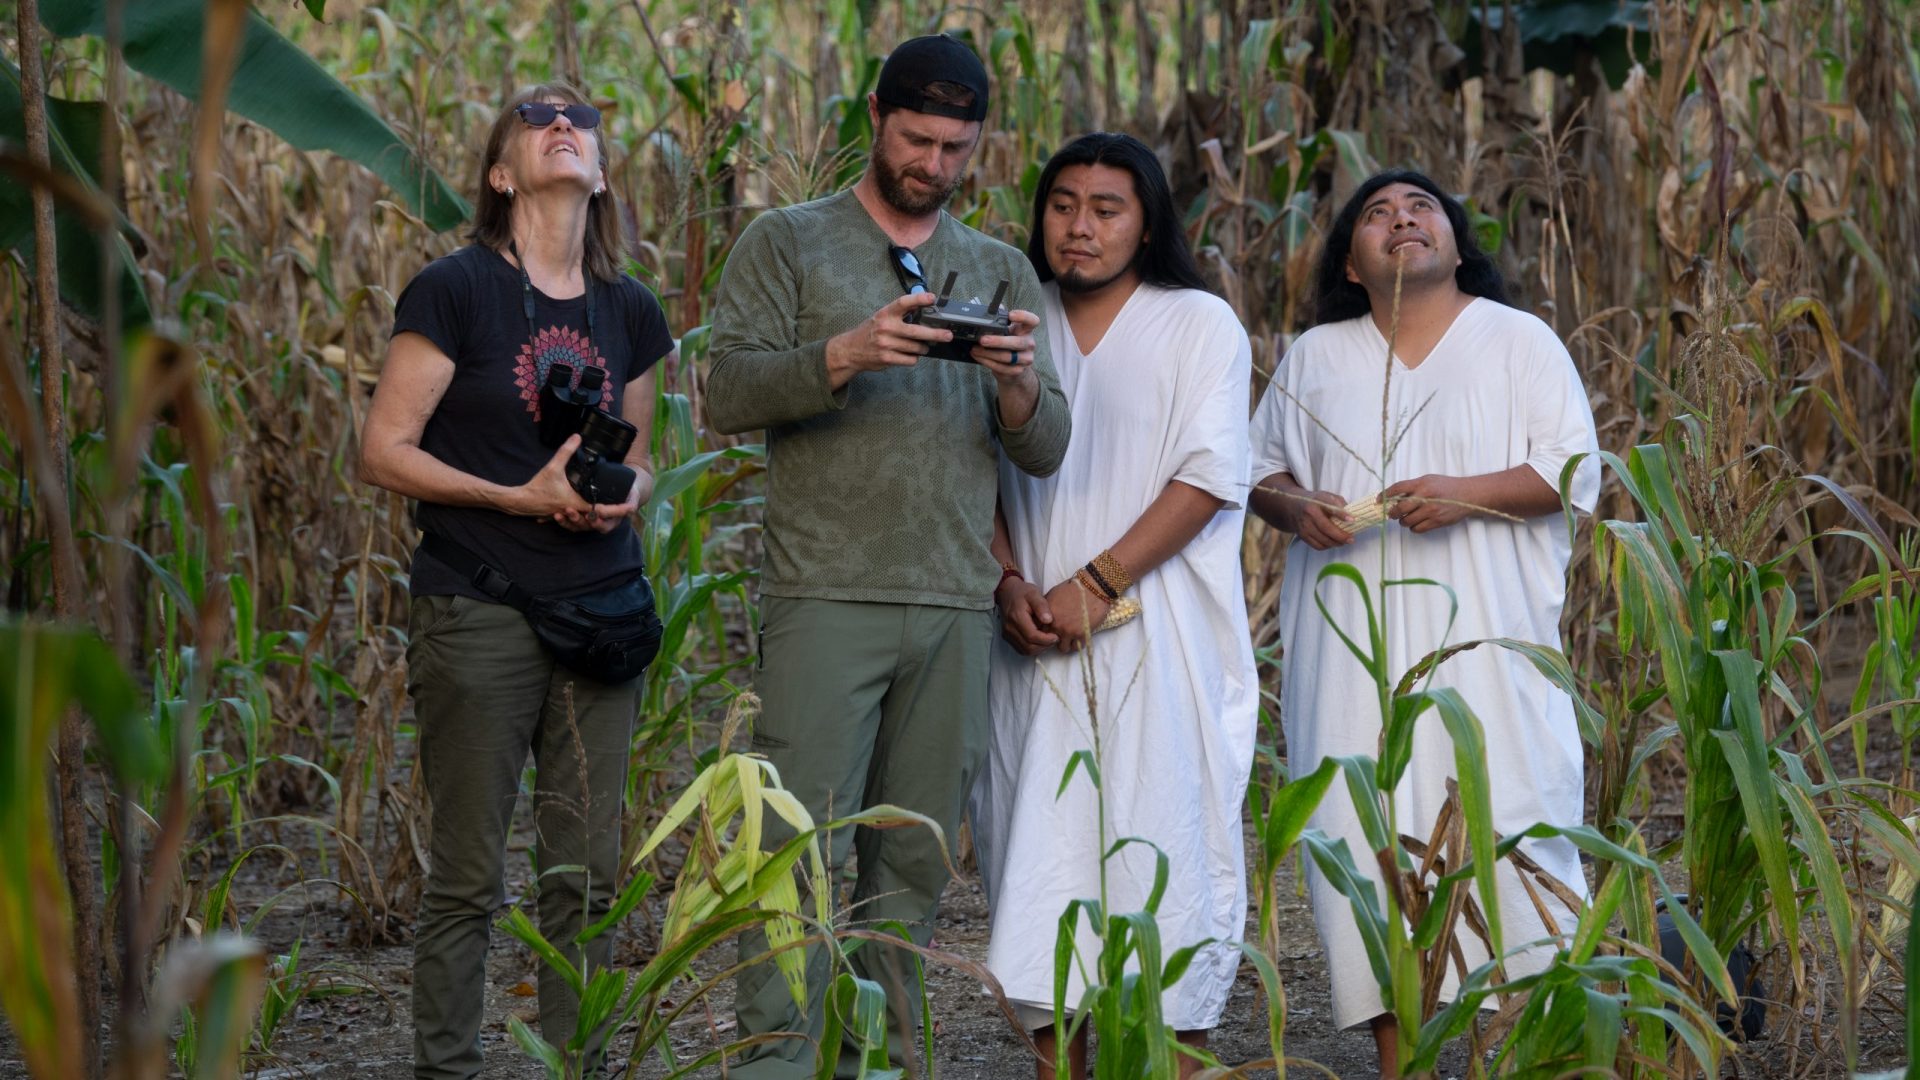 Richard S. and Judy Kern filming a traditional Maya milpa with the Chambor brothers from the Lacandon tribe in Chiapas, Mexico